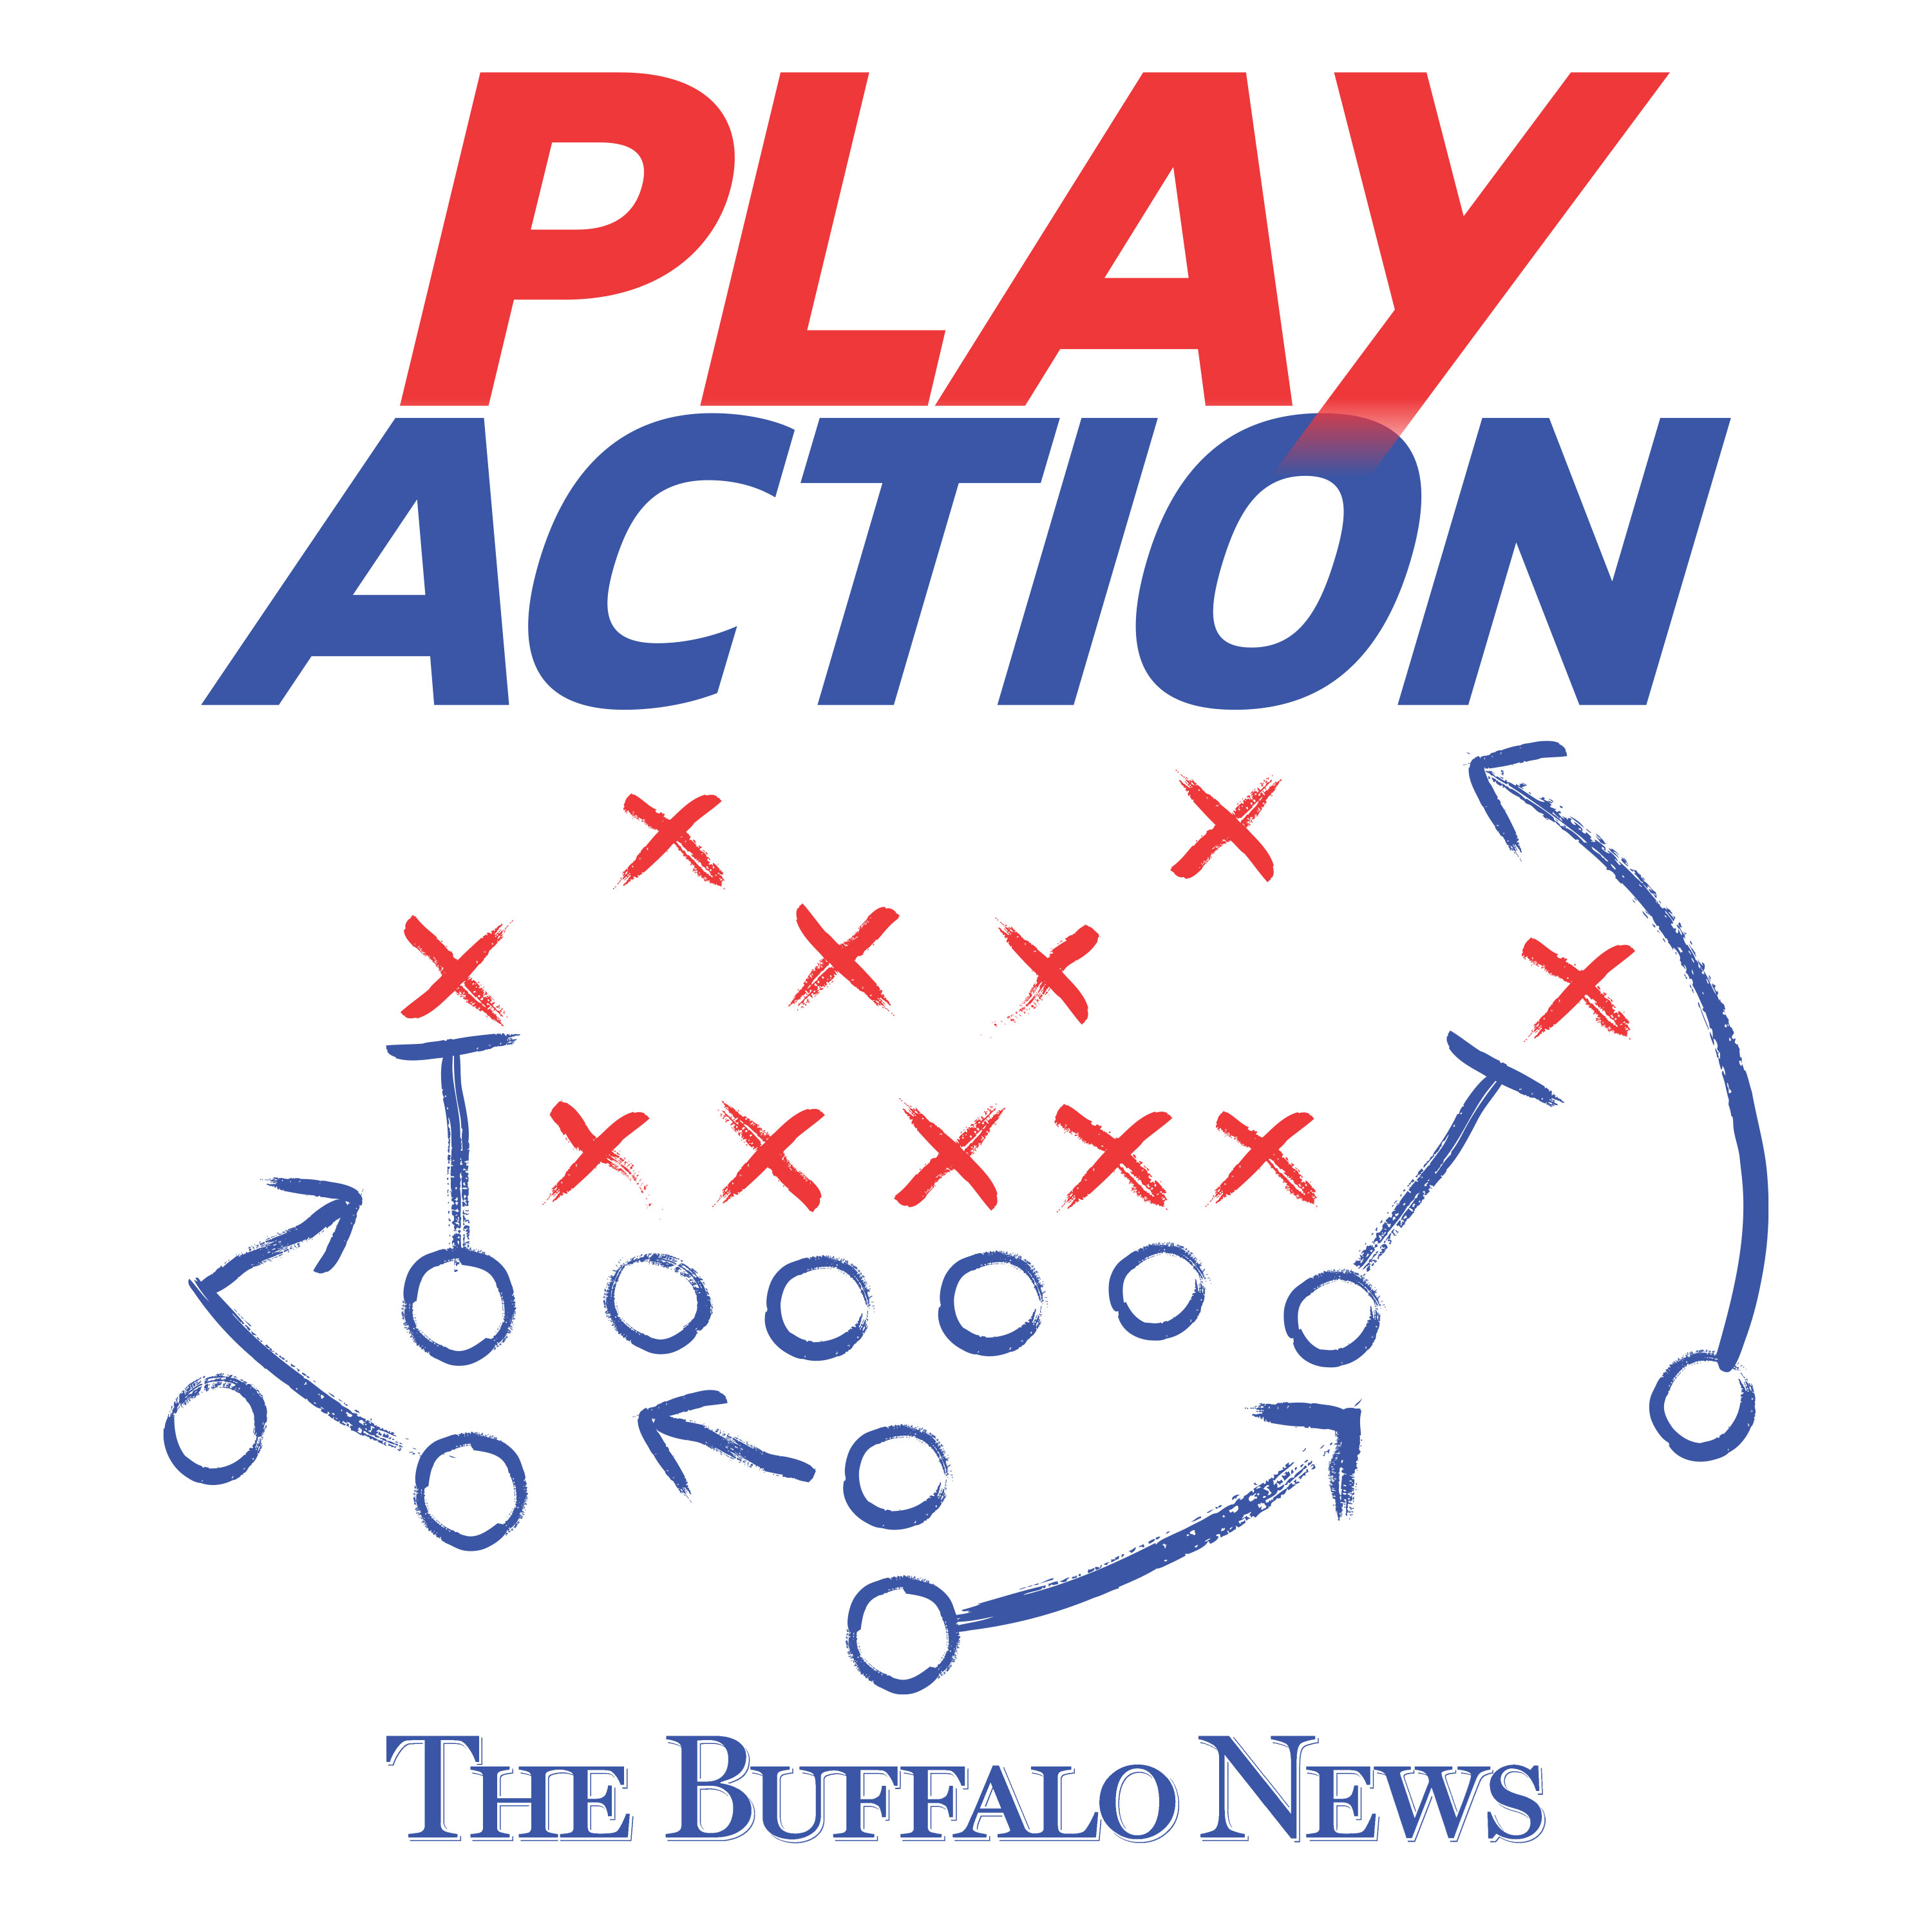 Let’s talk about the Bills playoff chances and another huge game in Kansas City